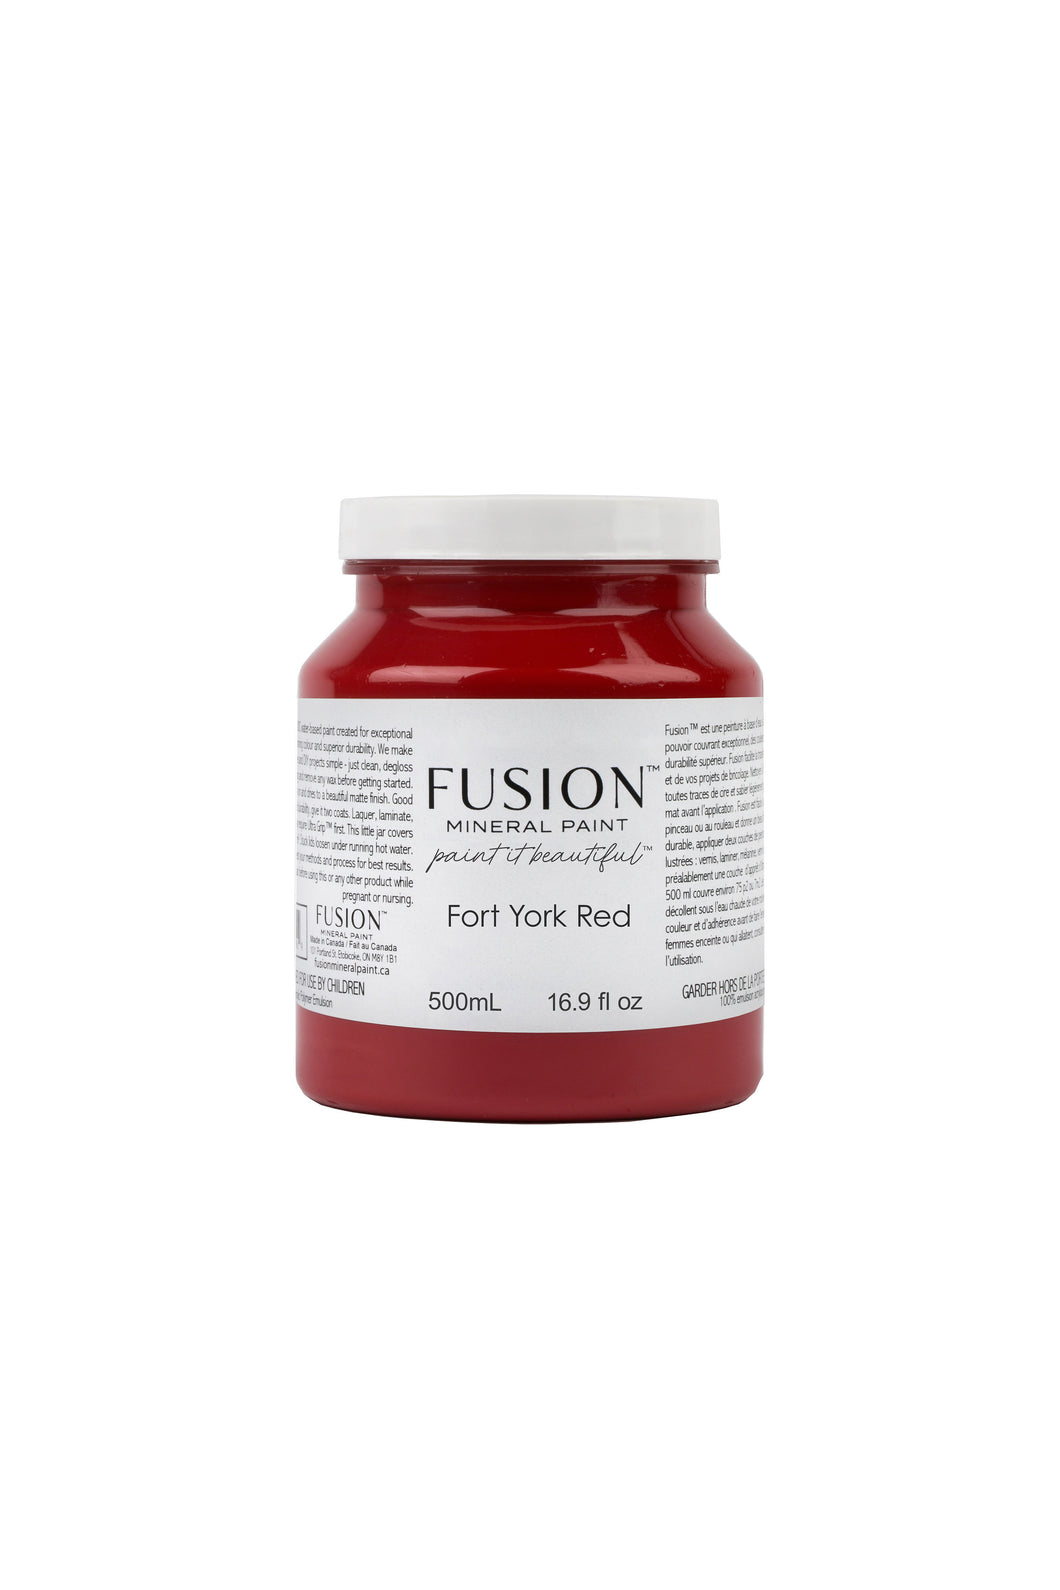 Fusion Mineral Paint - Fort York Red 500 ml Jar